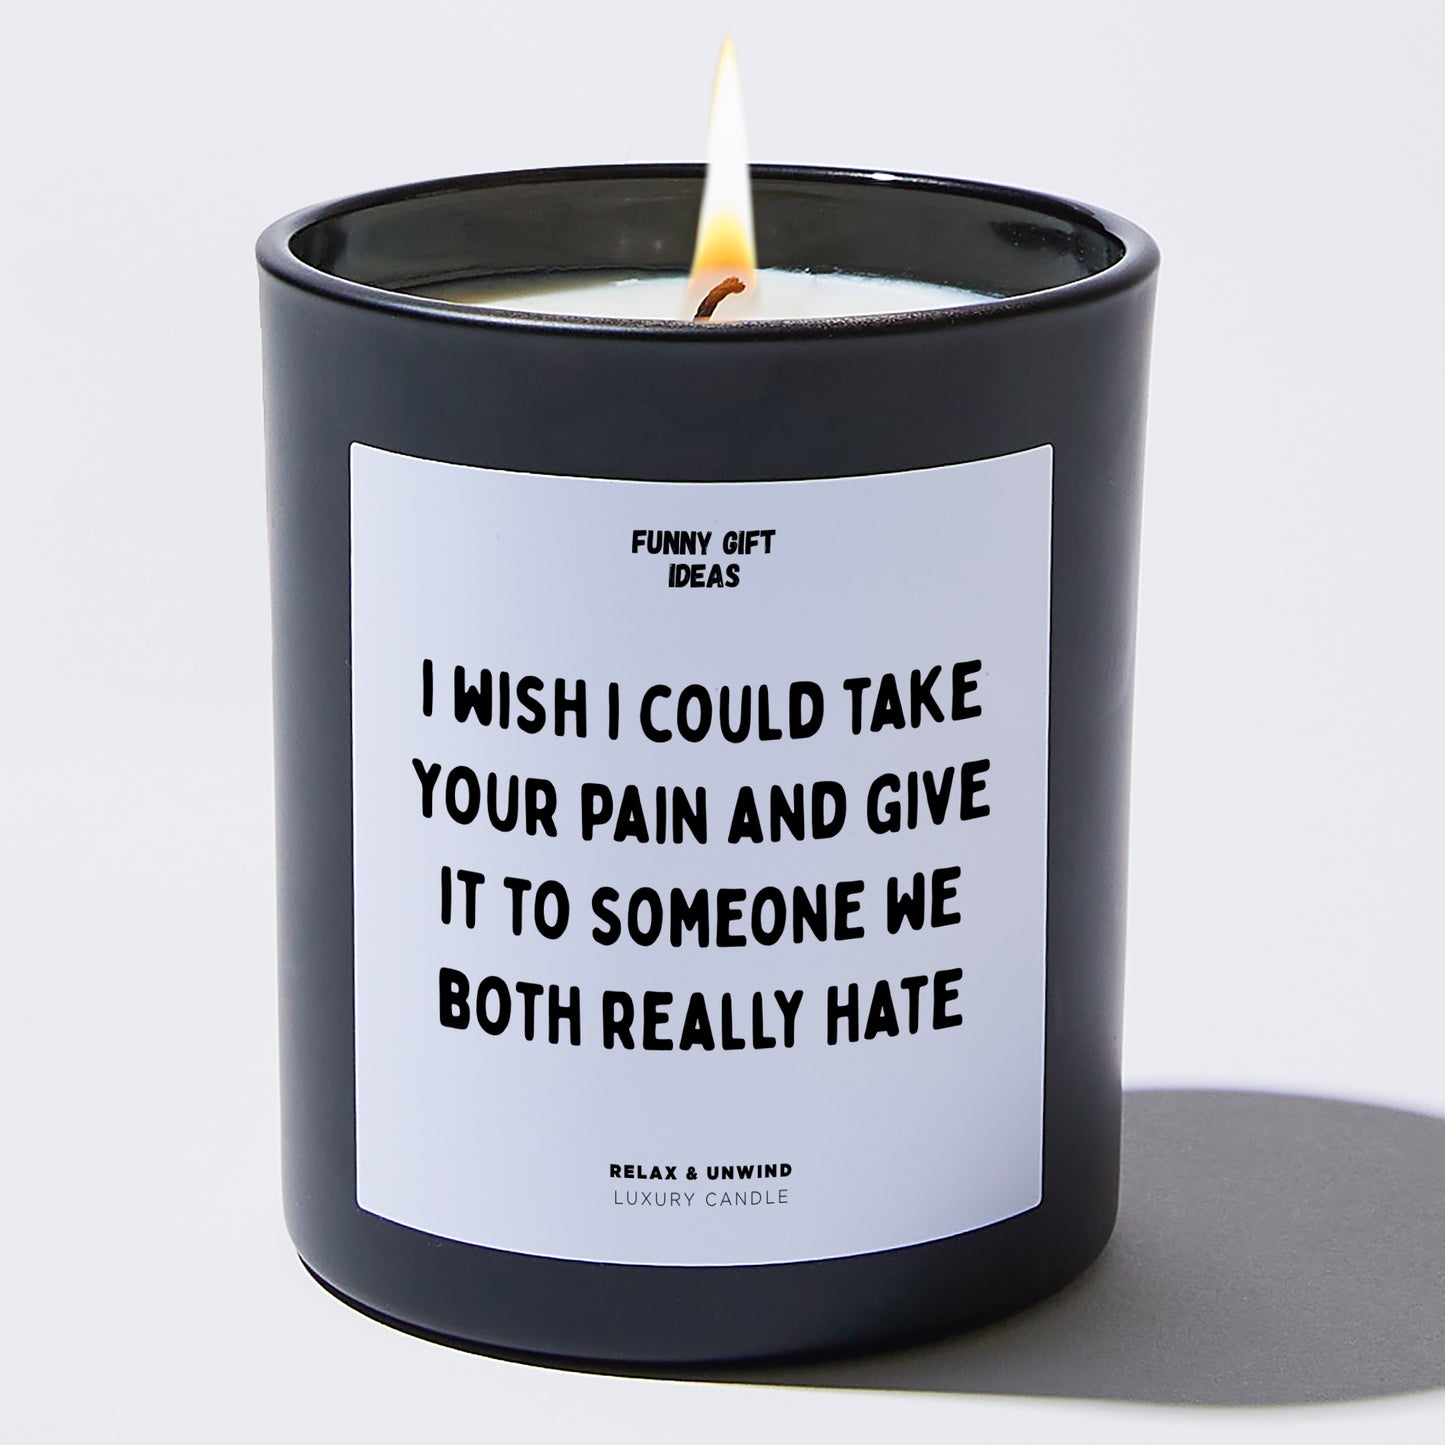 Fun Gift for Friends I Wish I Could Take Your Pain And Give It To Someone We Both Really Hate - Funny Gift Ideas